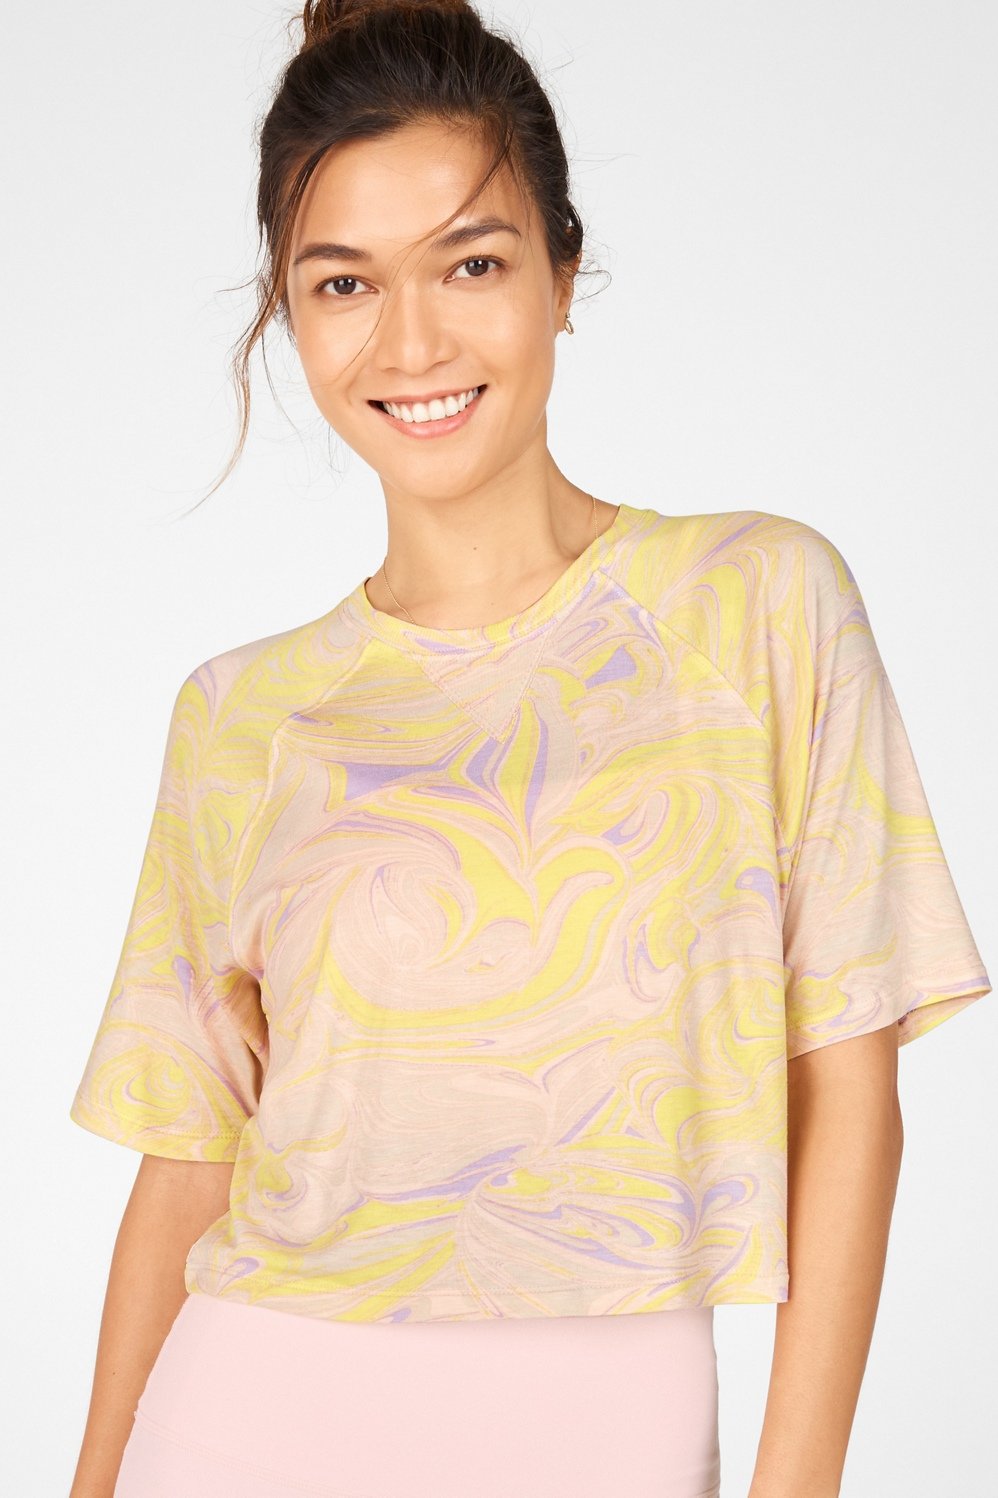 Lovely Loose Fit Shirt – The mable